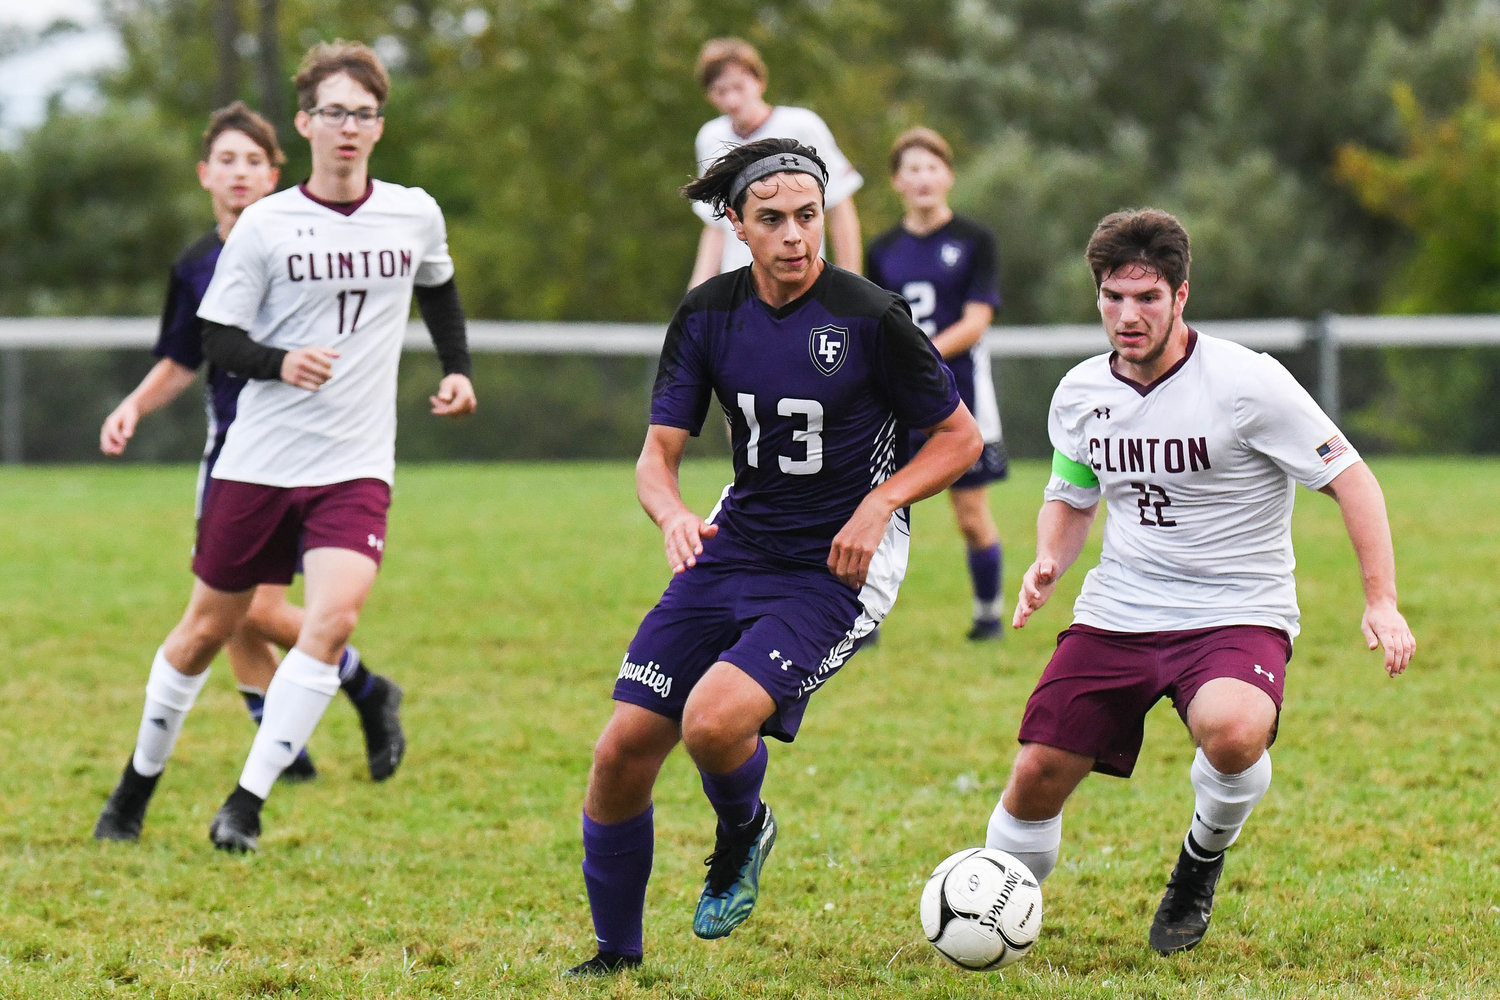 Little Falls player Sean Carroll, center, fights for control of the ball with Clinton's Joseph Frank, right, during the game on Tuesday. Little Falls won 3-1.